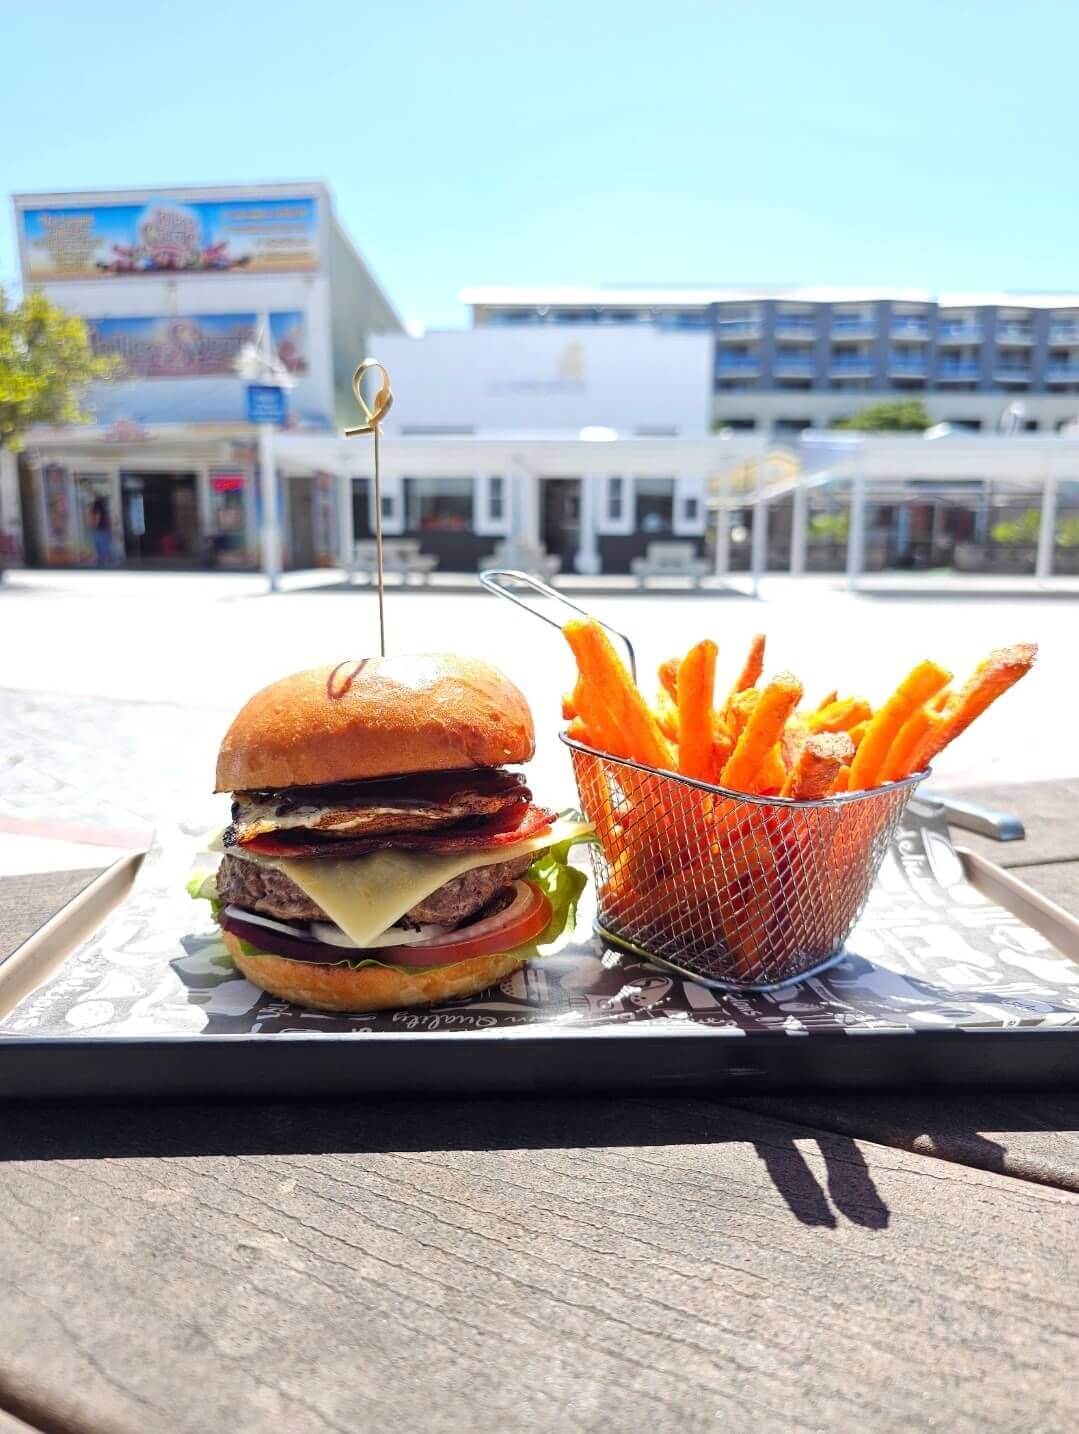 Burgers and fries on a rectangle board in the sun with a row of shops in the distant background